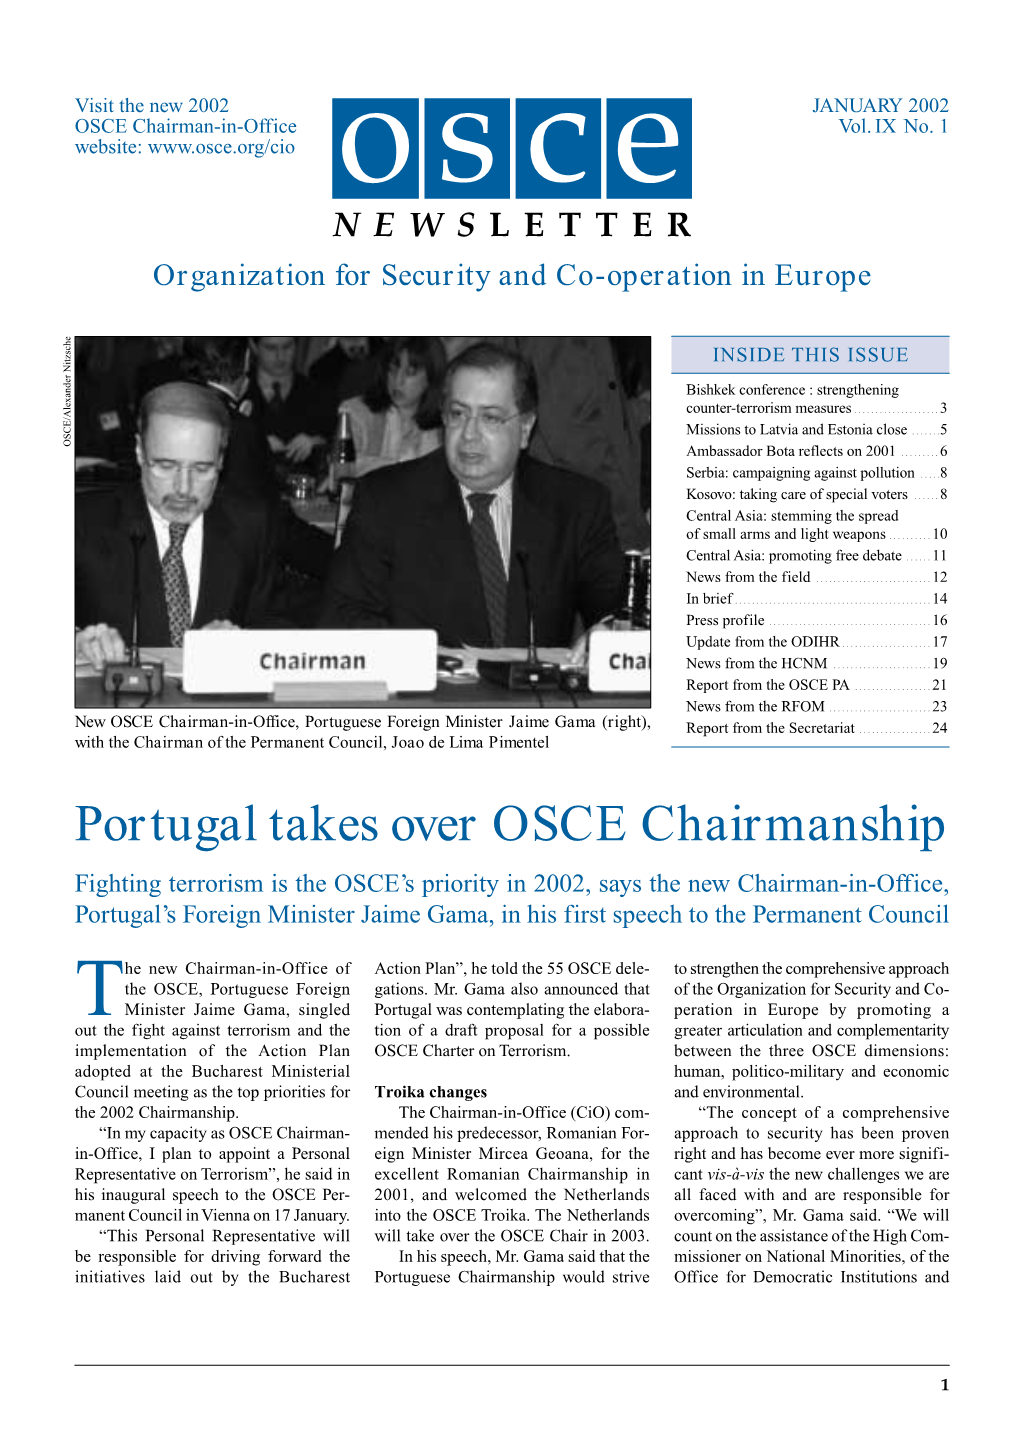 Portugal Takes Over OSCE Chairmanship